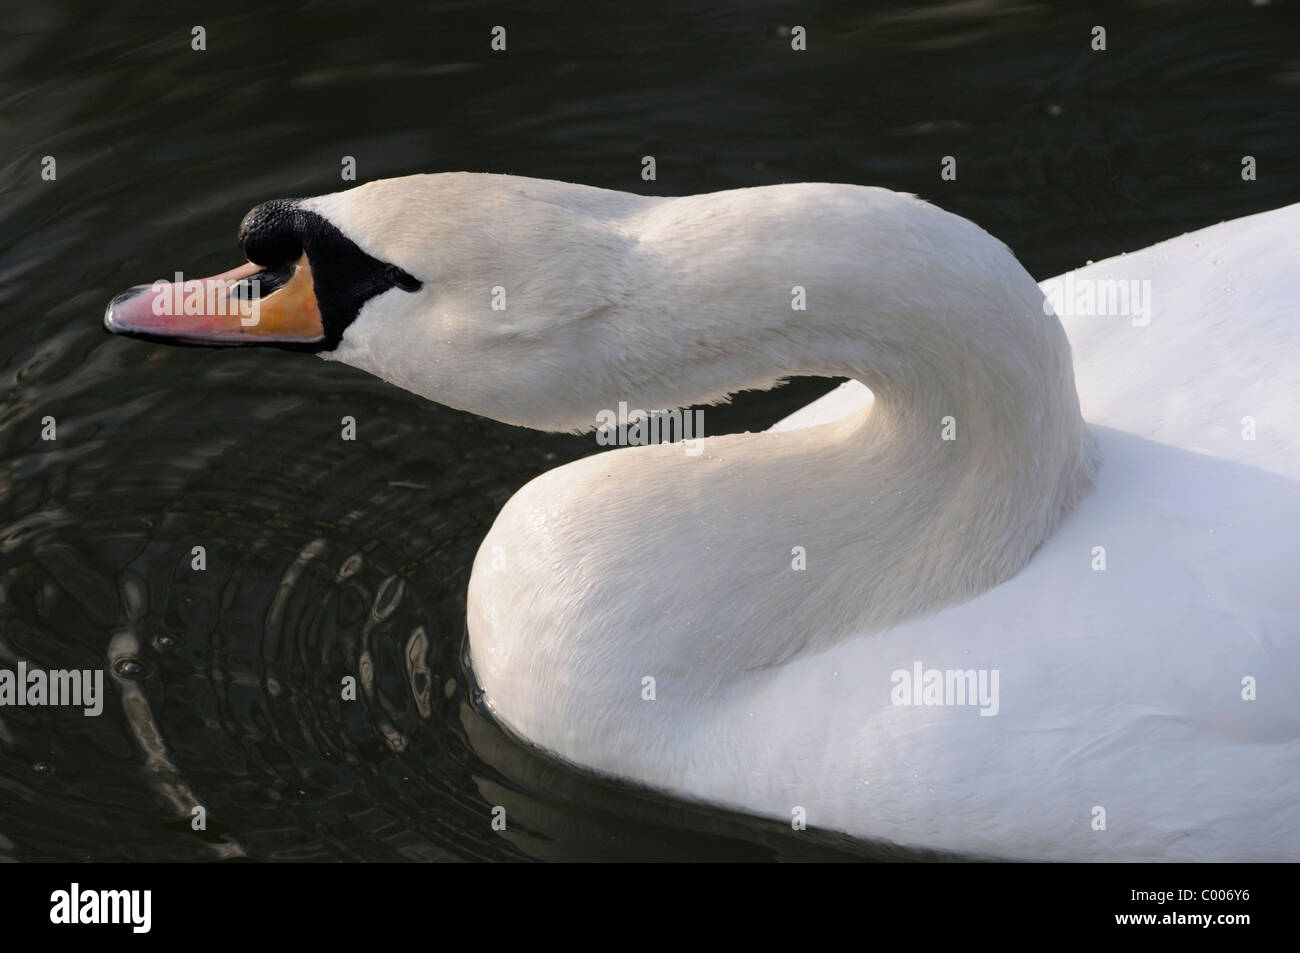 A close-up photograph of a swan's head and neck. Stock Photo